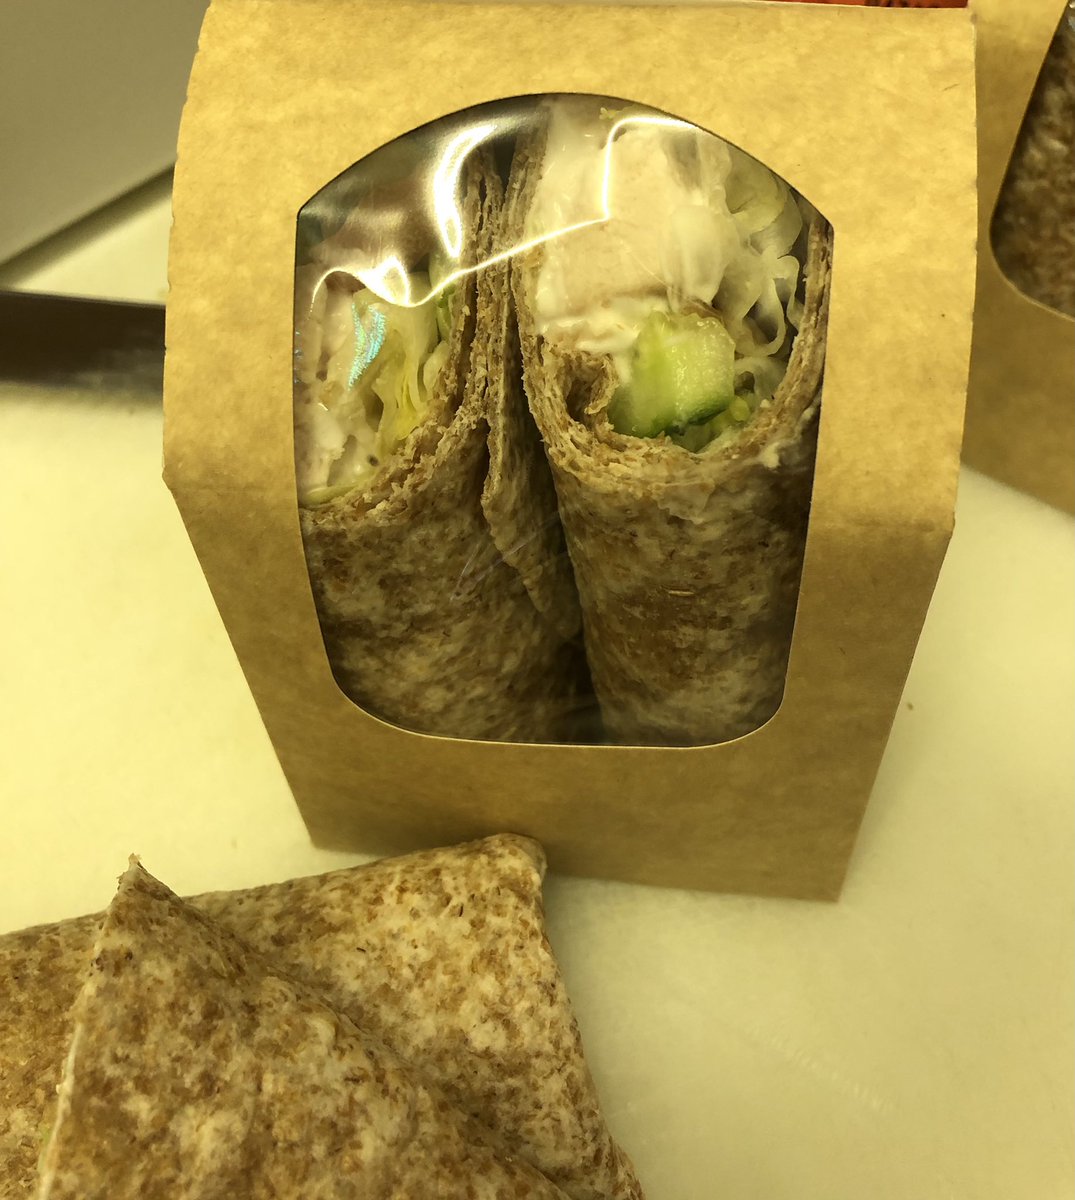 #packlunches #wholemealwraps #chickenmayosalad #newforspring